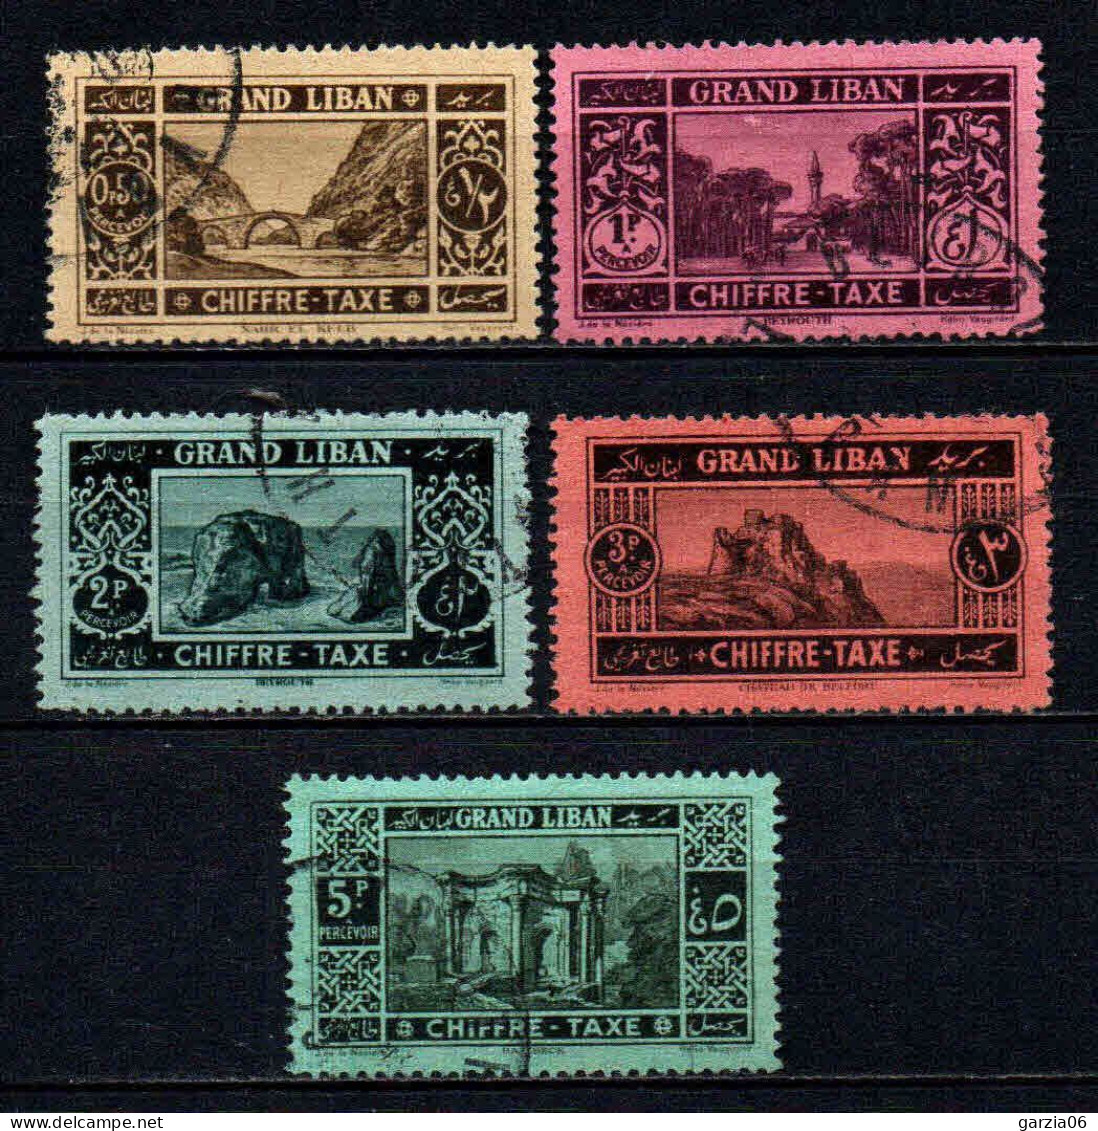 Grand Liban - 1925 - Tb Taxe 11 à 15  - Oblit - Used - Strafport